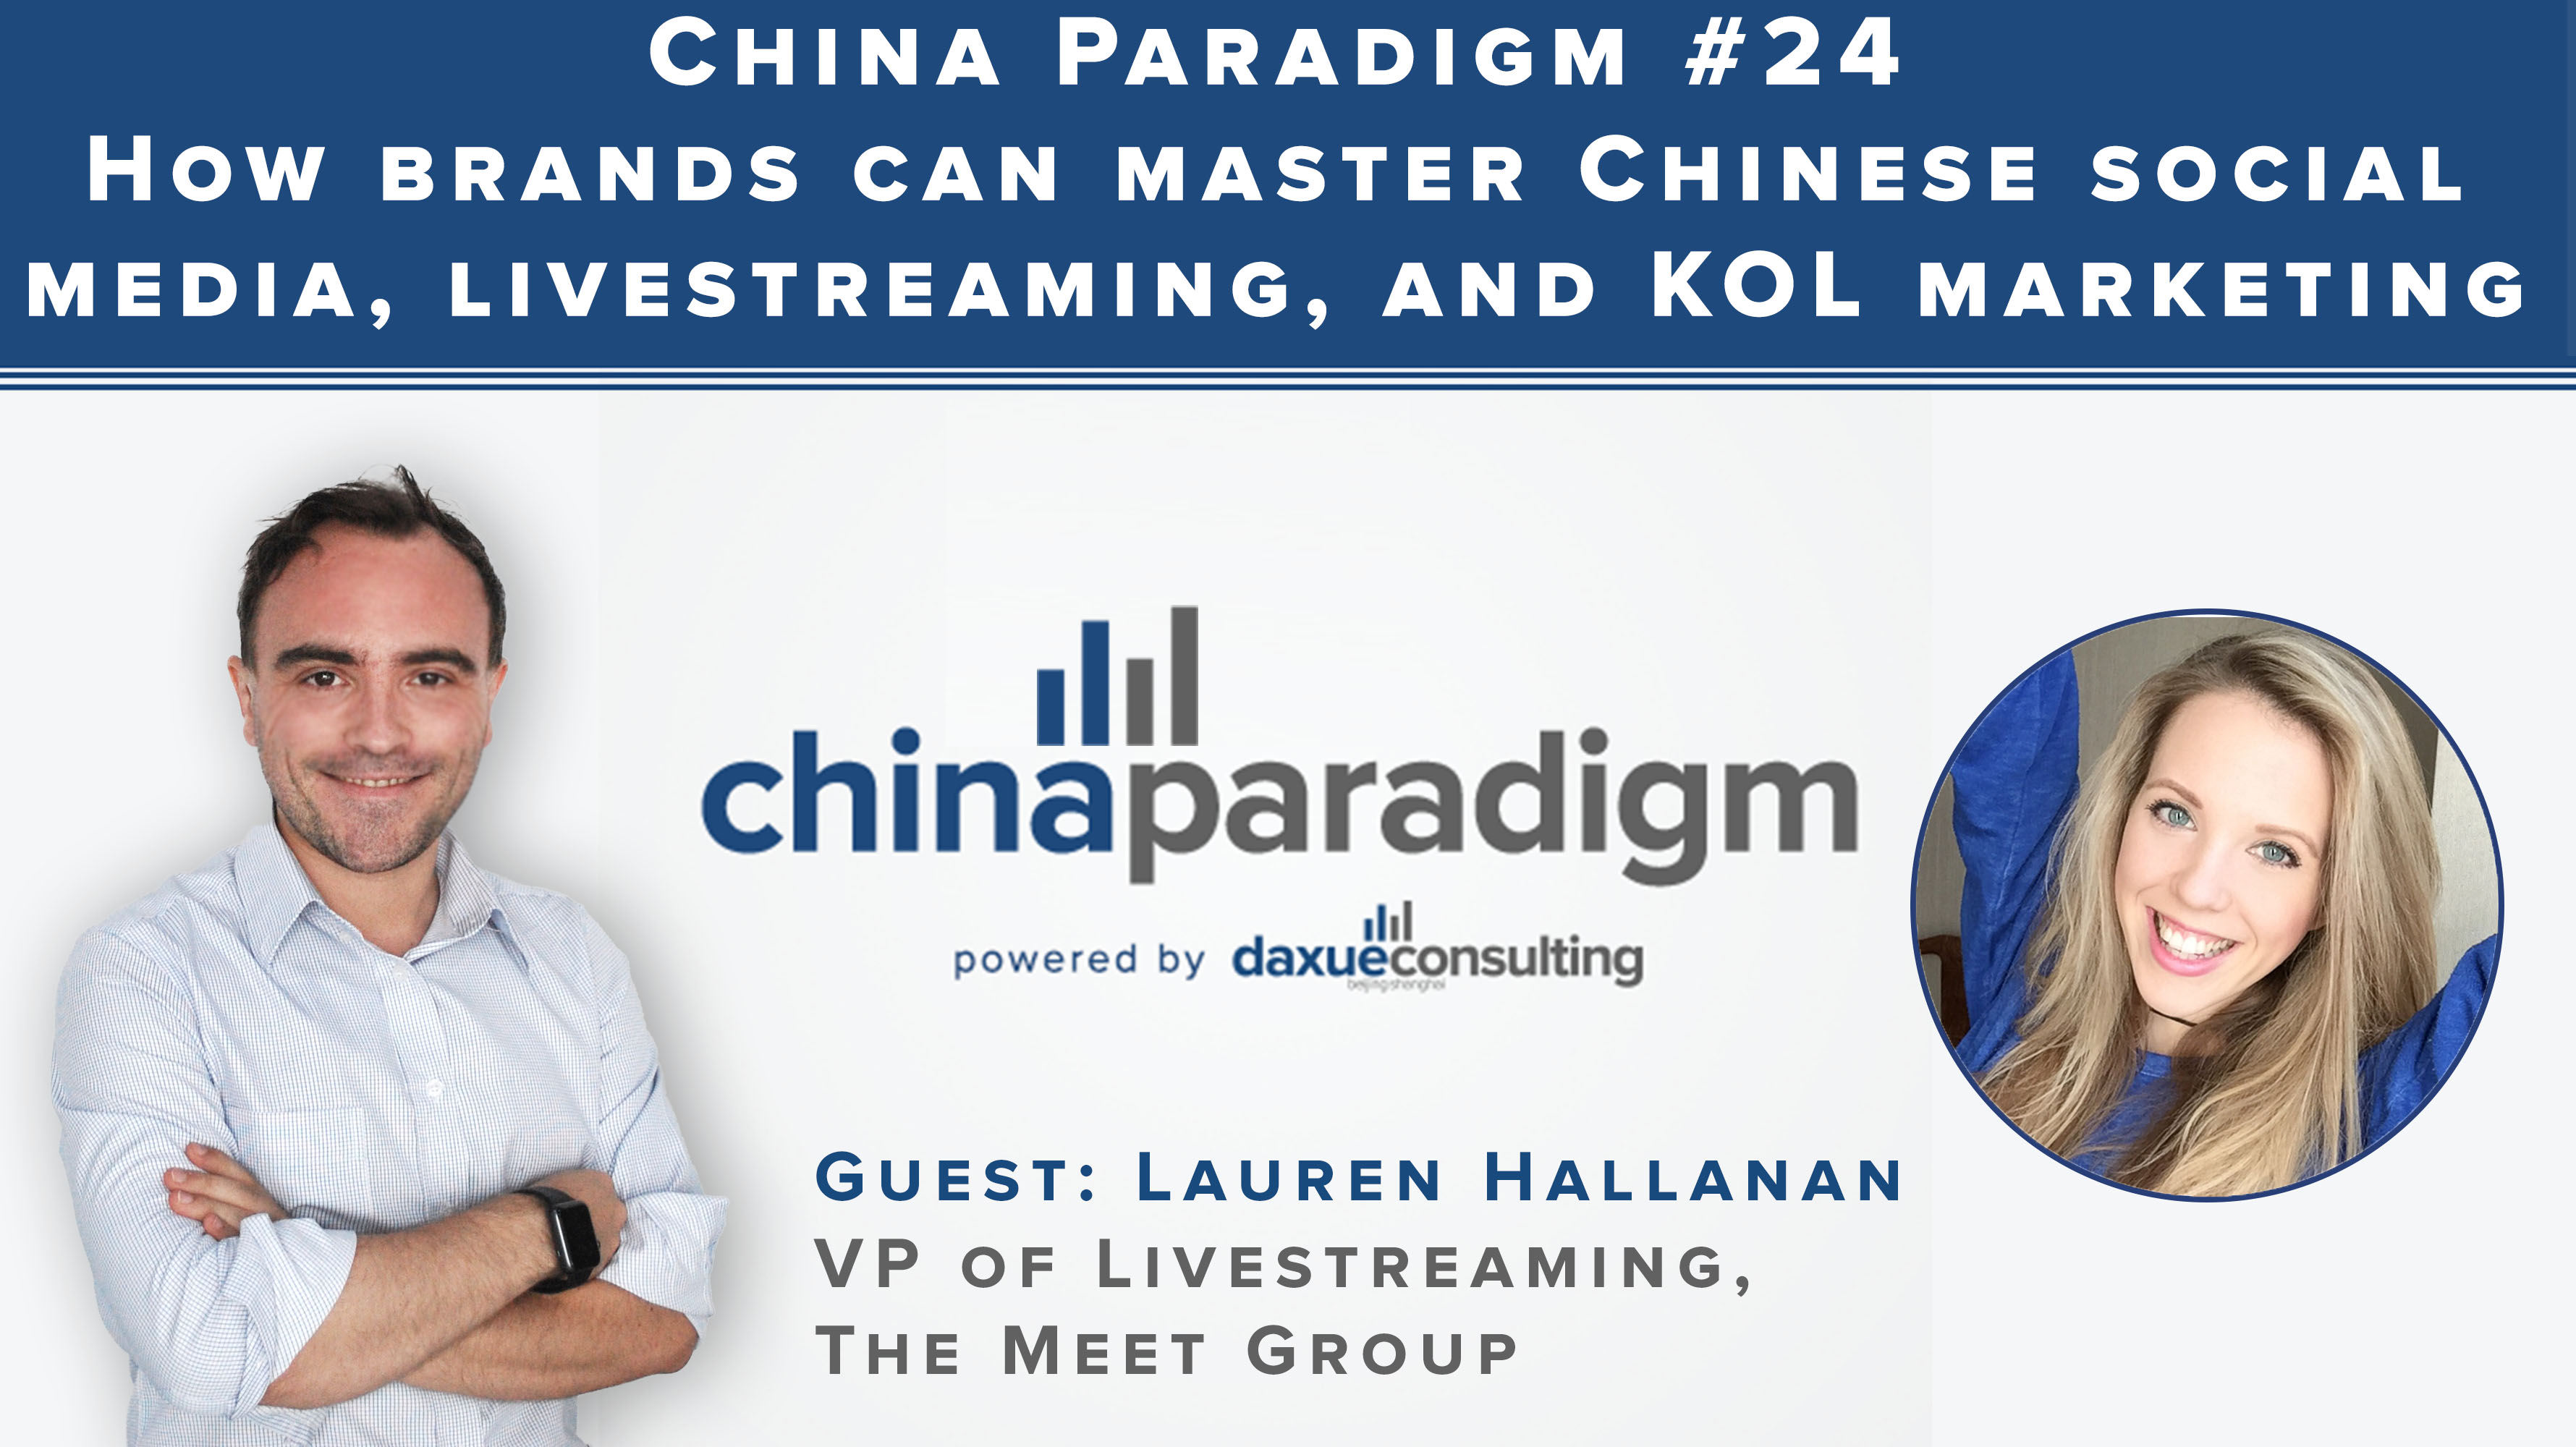 [Podcast] China Paradigm #24: How brands can master Chinese social media, livestreaming, and KOL marketing